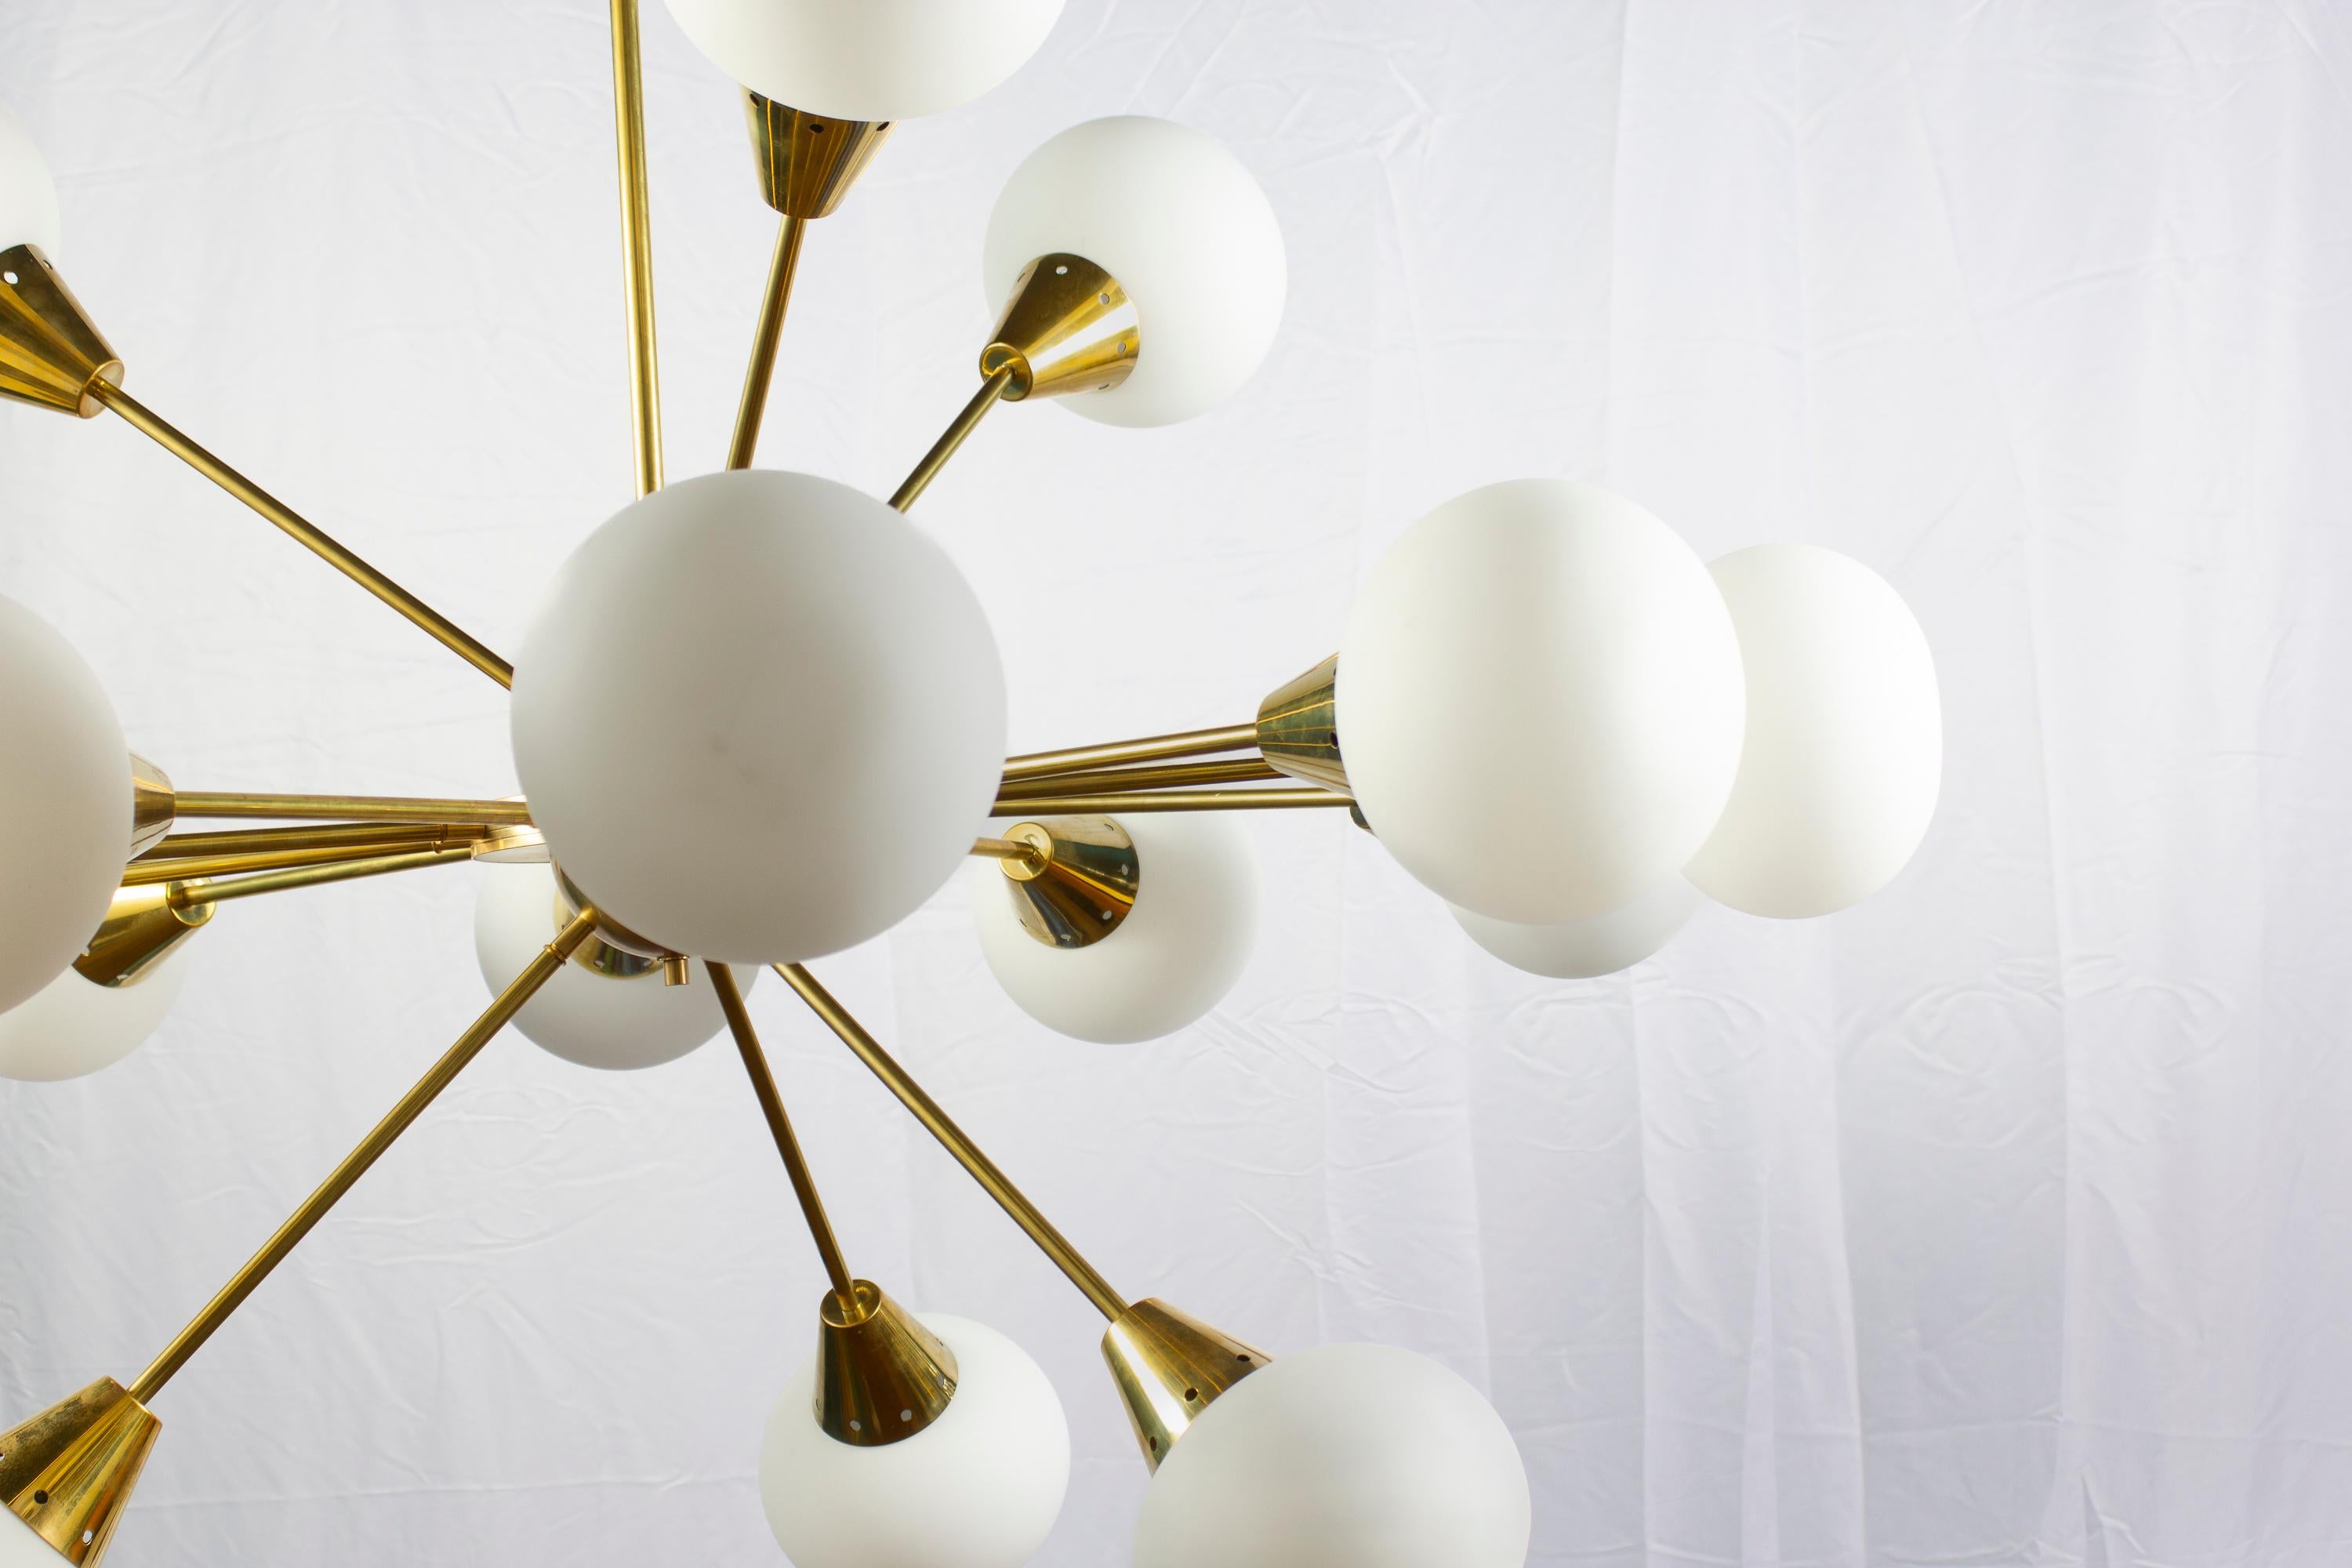 Extraordinary Italian midcentury brass and 16 opaline sphere Murano glass large Sputnik chandelier.
Available also a pair. The brass height is customizable.
16 E27 light bulbs.
This light fixture can be disassembled and the glasses individually